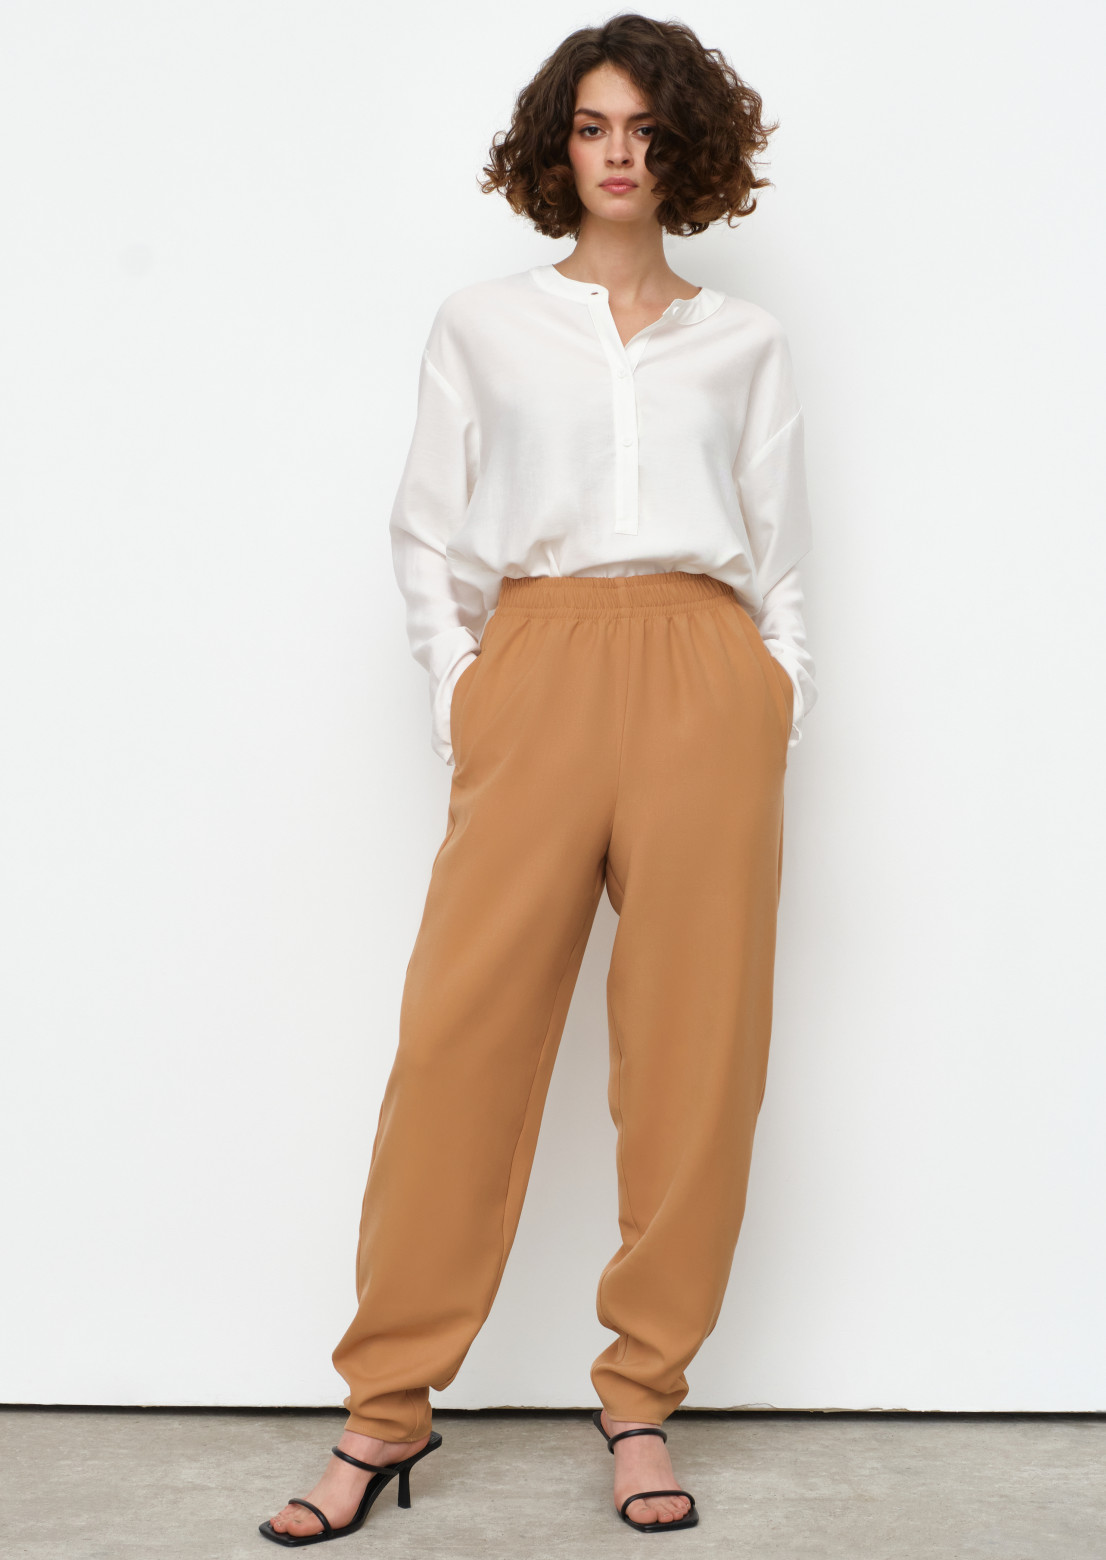 Beige colour tight fabric trousers